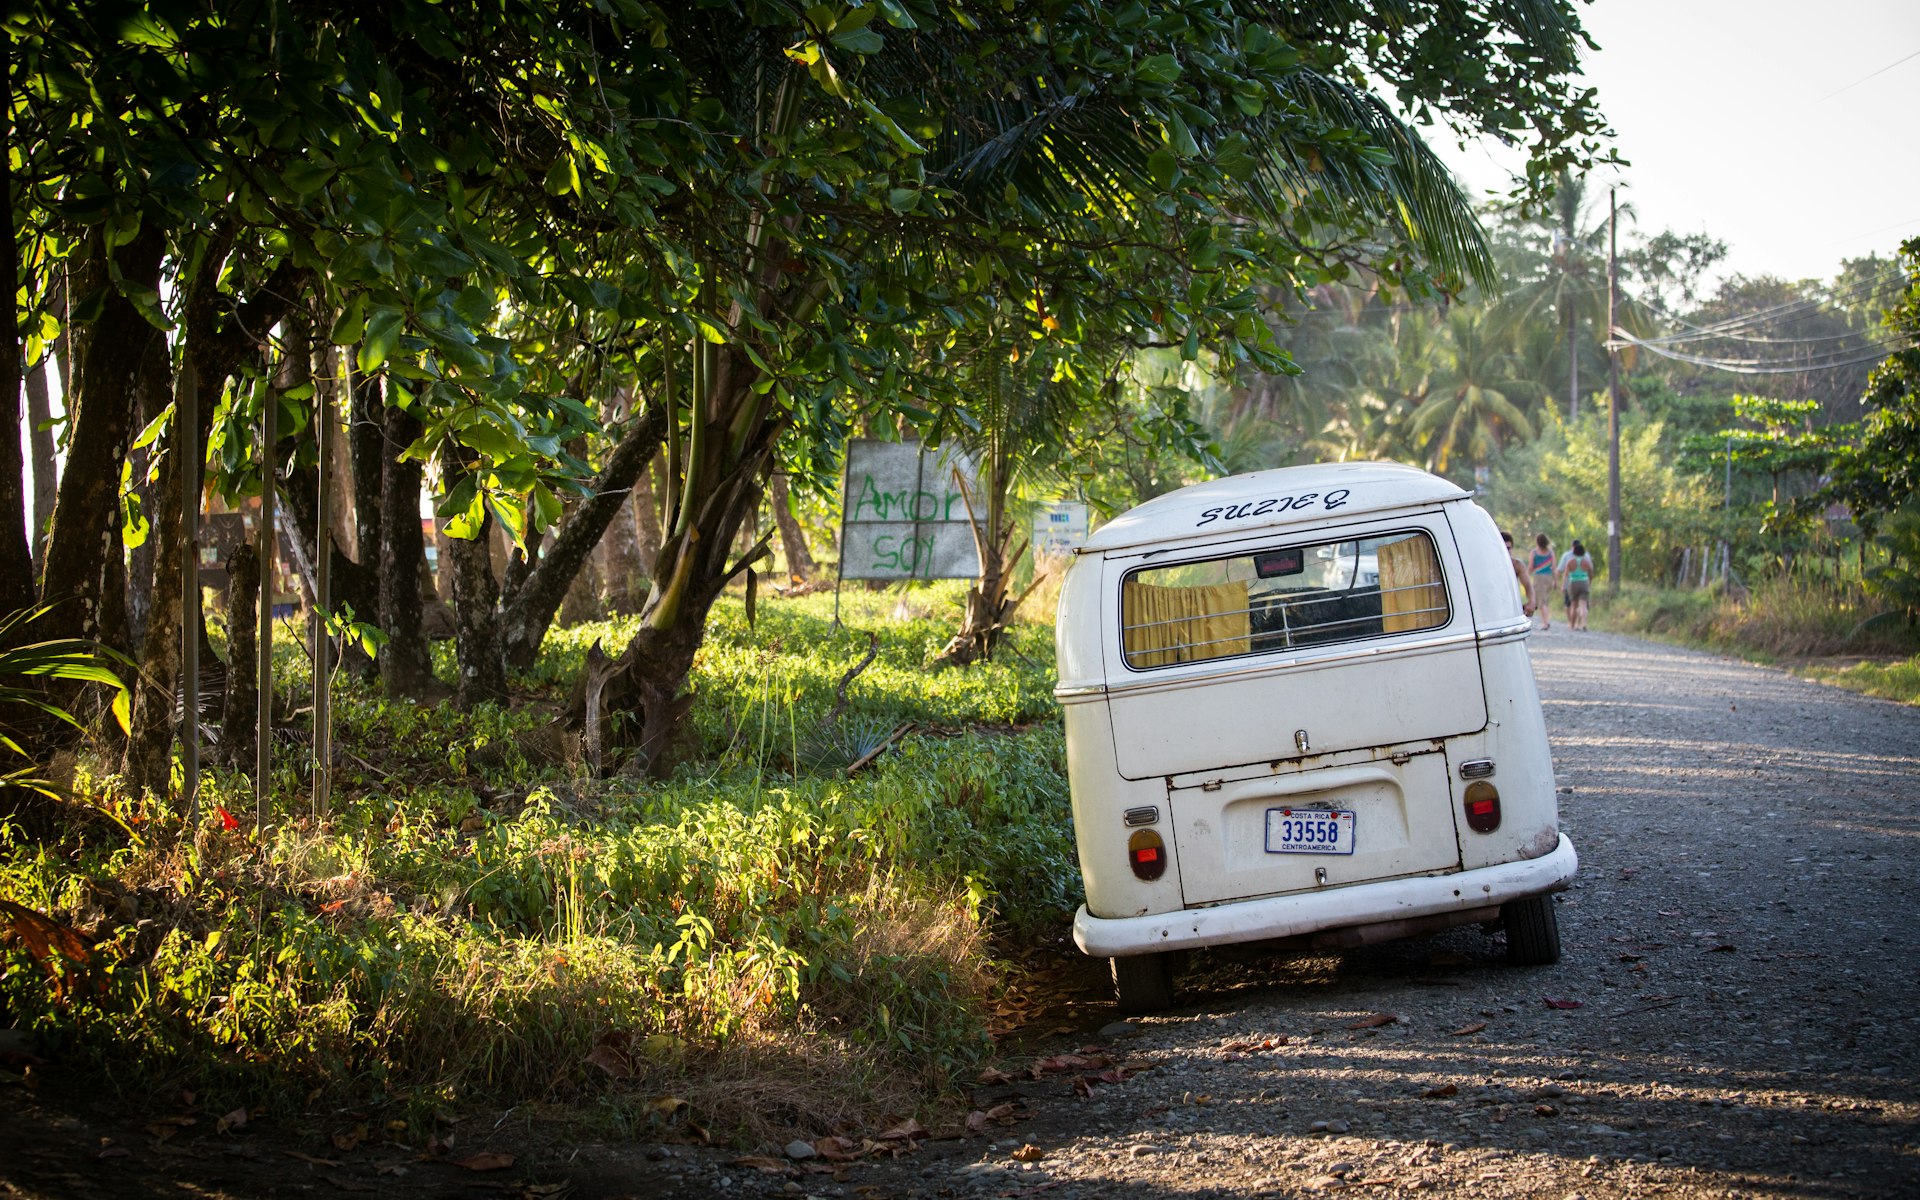 A small campervan parked at the side of a road